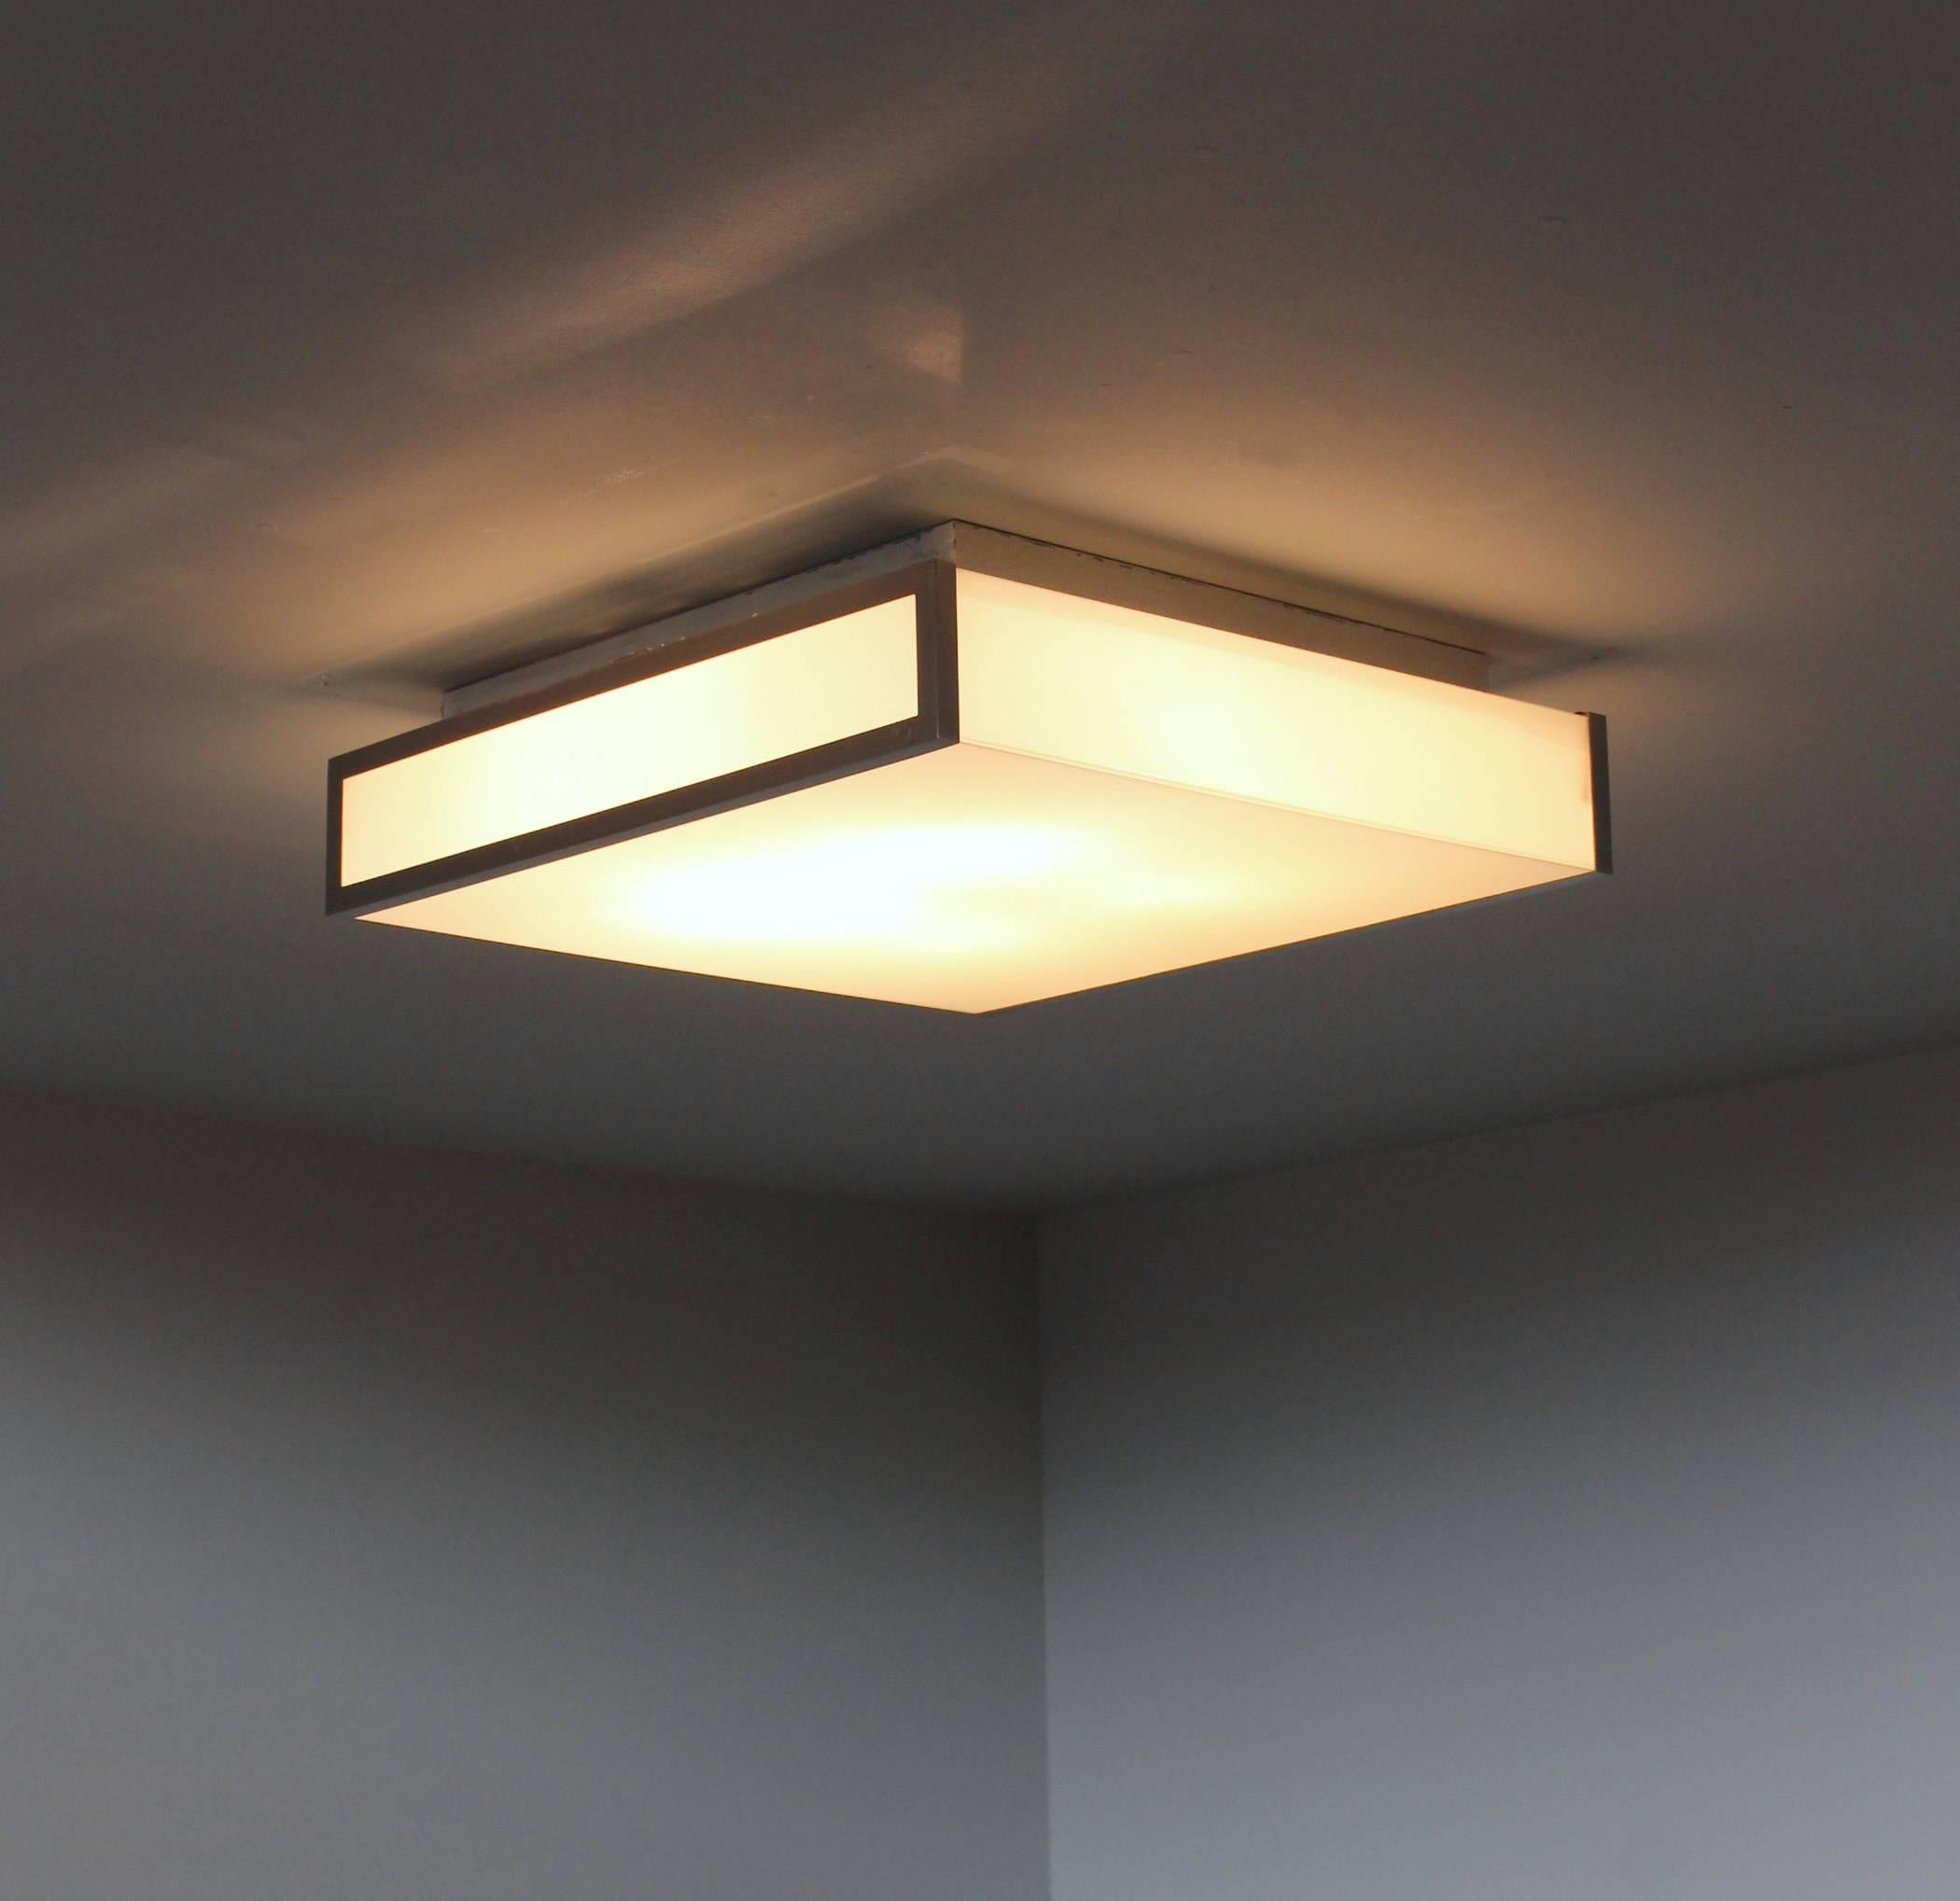 With a minimalist chromed frames that hold some white enameled glass which diffuse a nice bright light.
Can be used as a ceiling or wall light.
